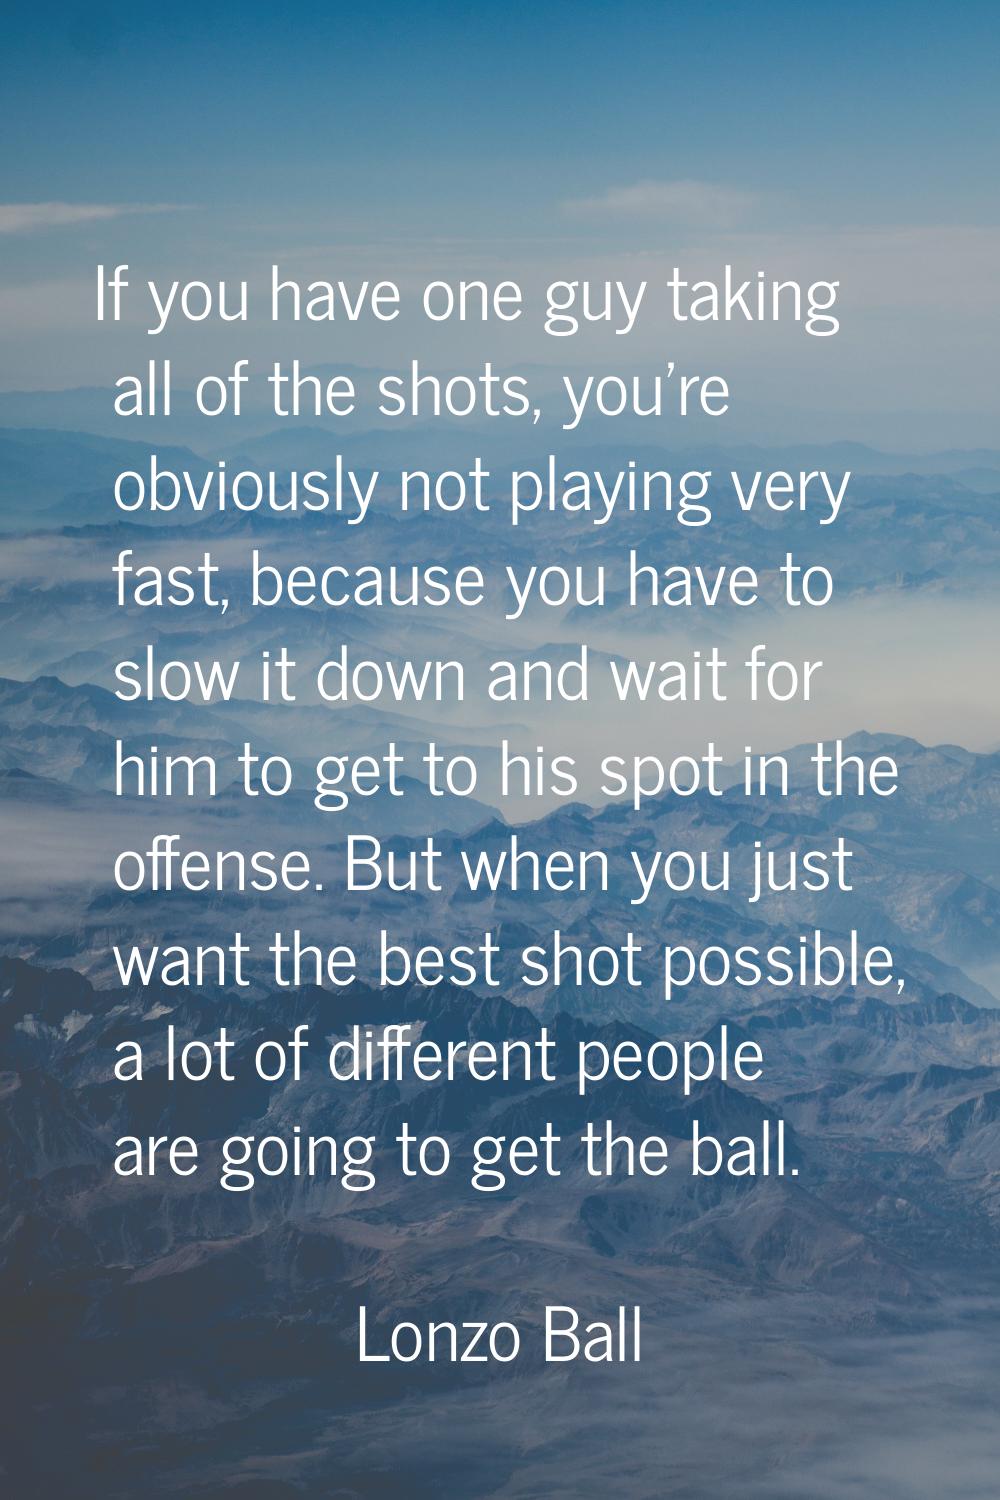 If you have one guy taking all of the shots, you're obviously not playing very fast, because you ha